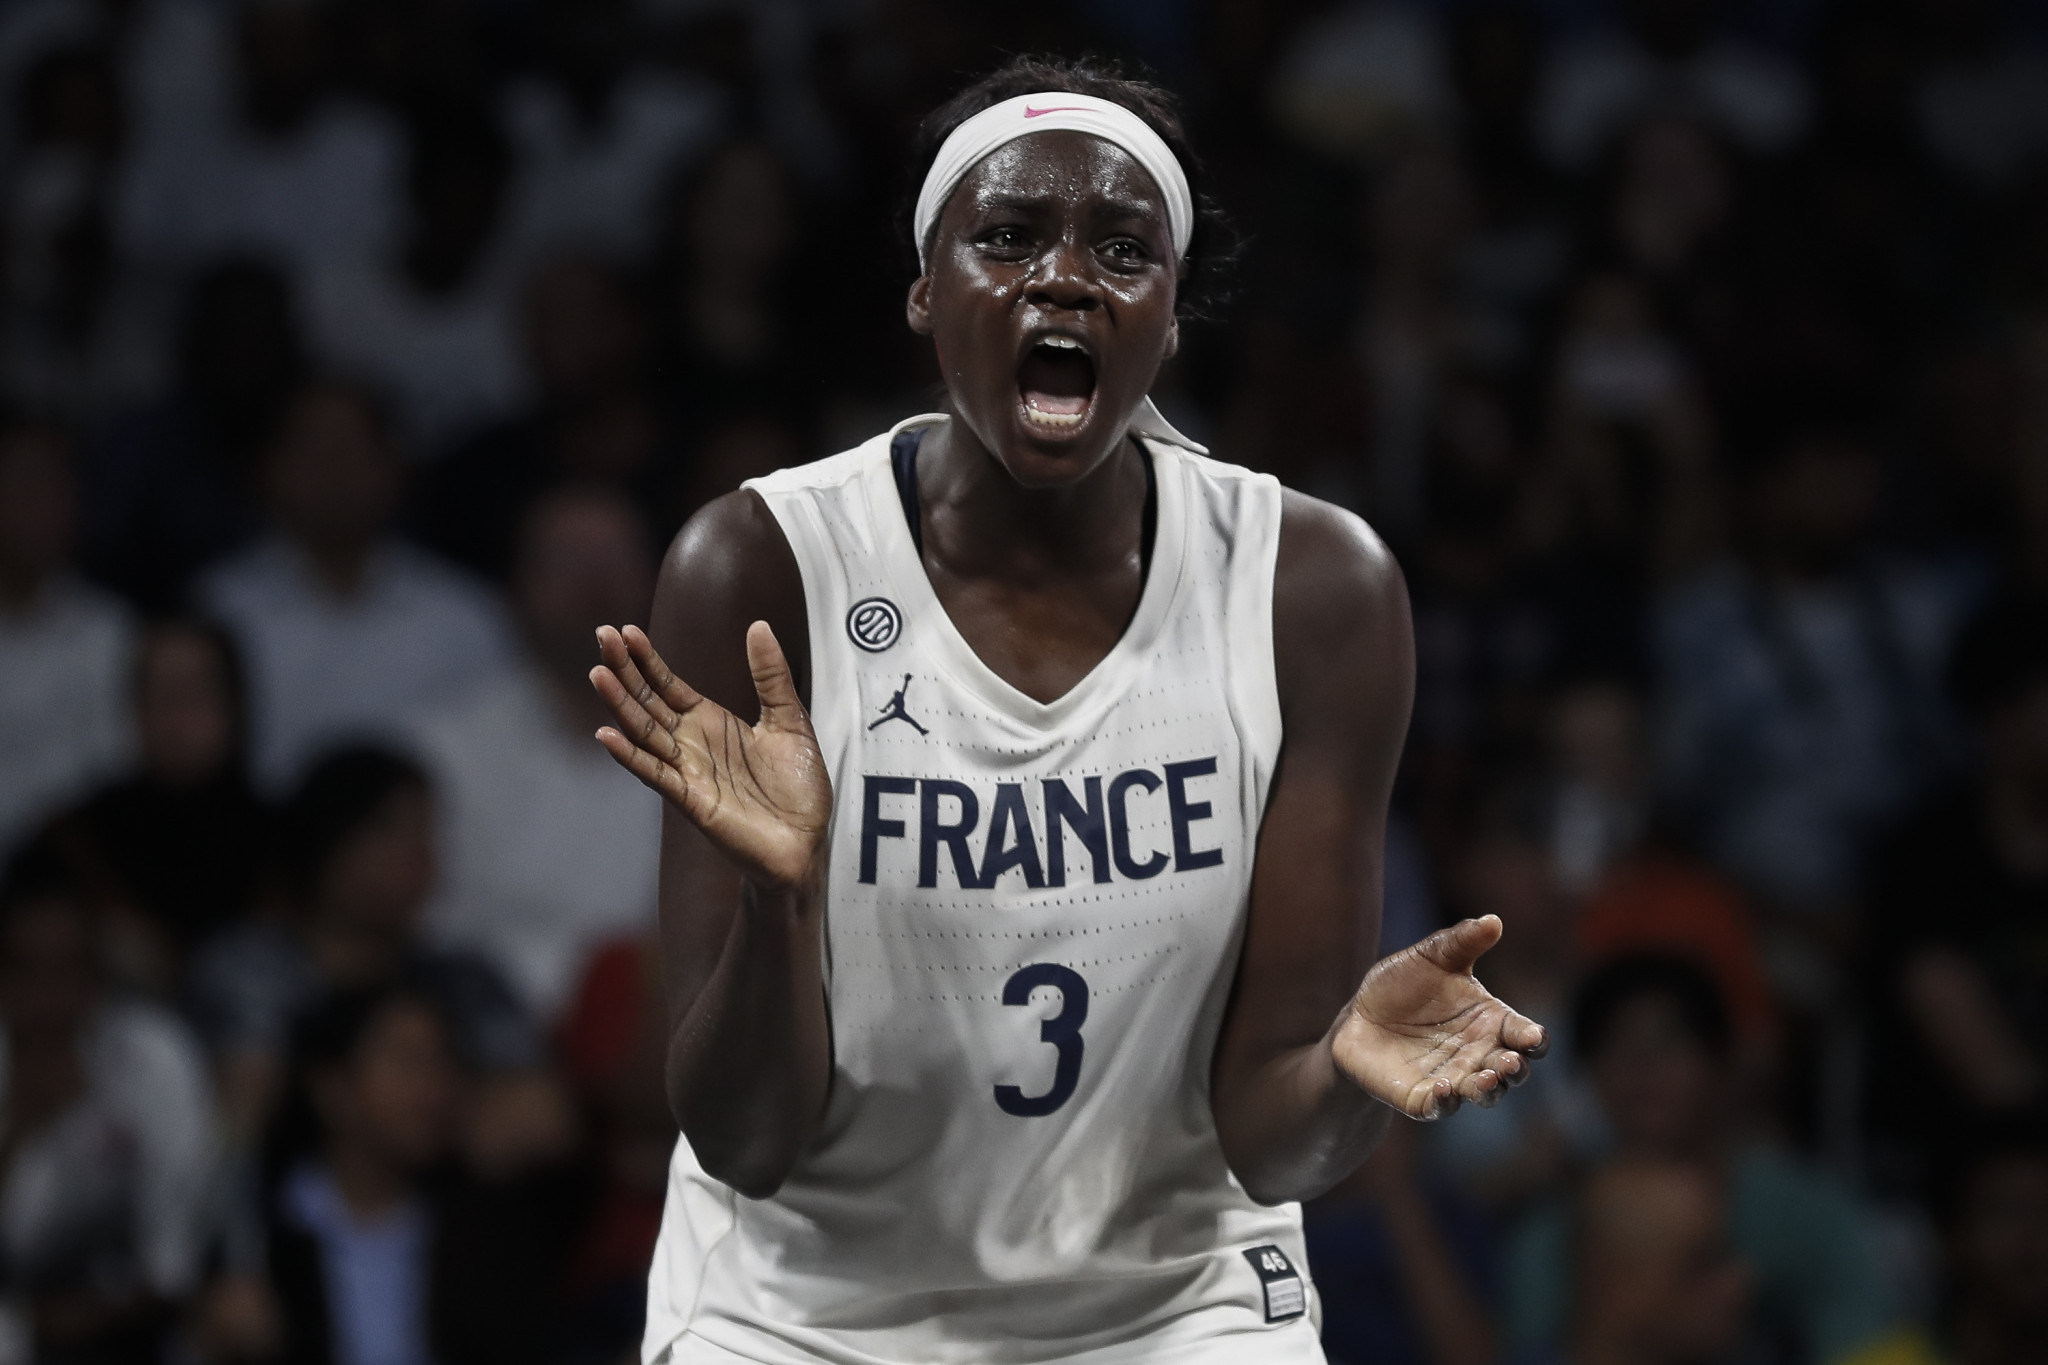 France triumphed in the women's 3x3 basketball ©ANOC